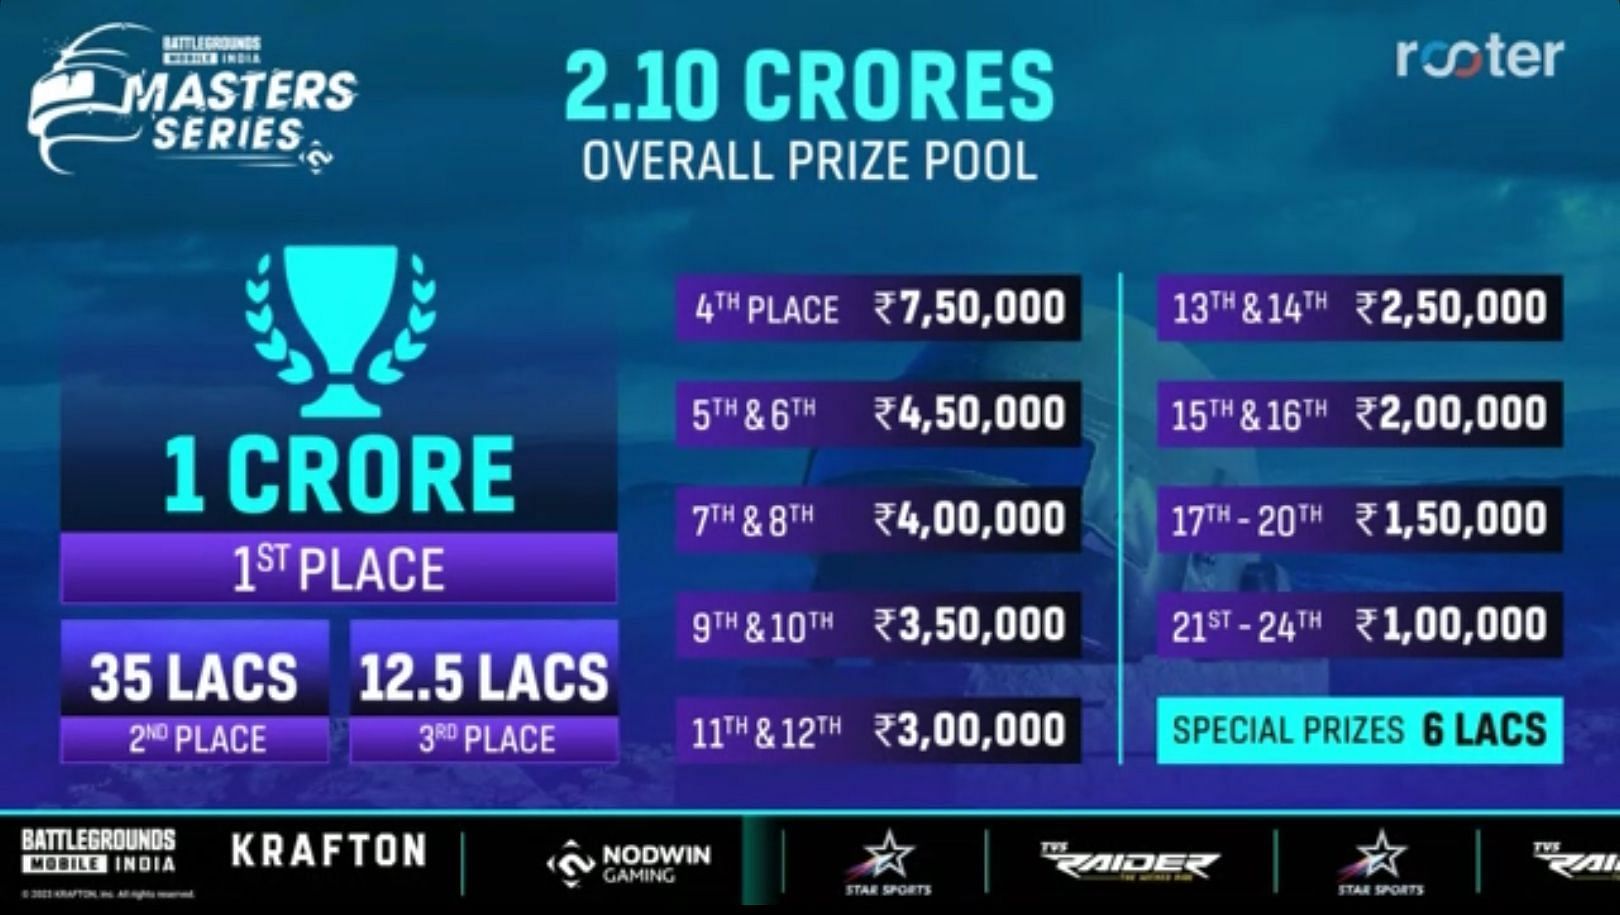 BGMI Masters Series Season 2 offers a total prize pool of ₹2.10 crore up for grabs (Image via Rooter)